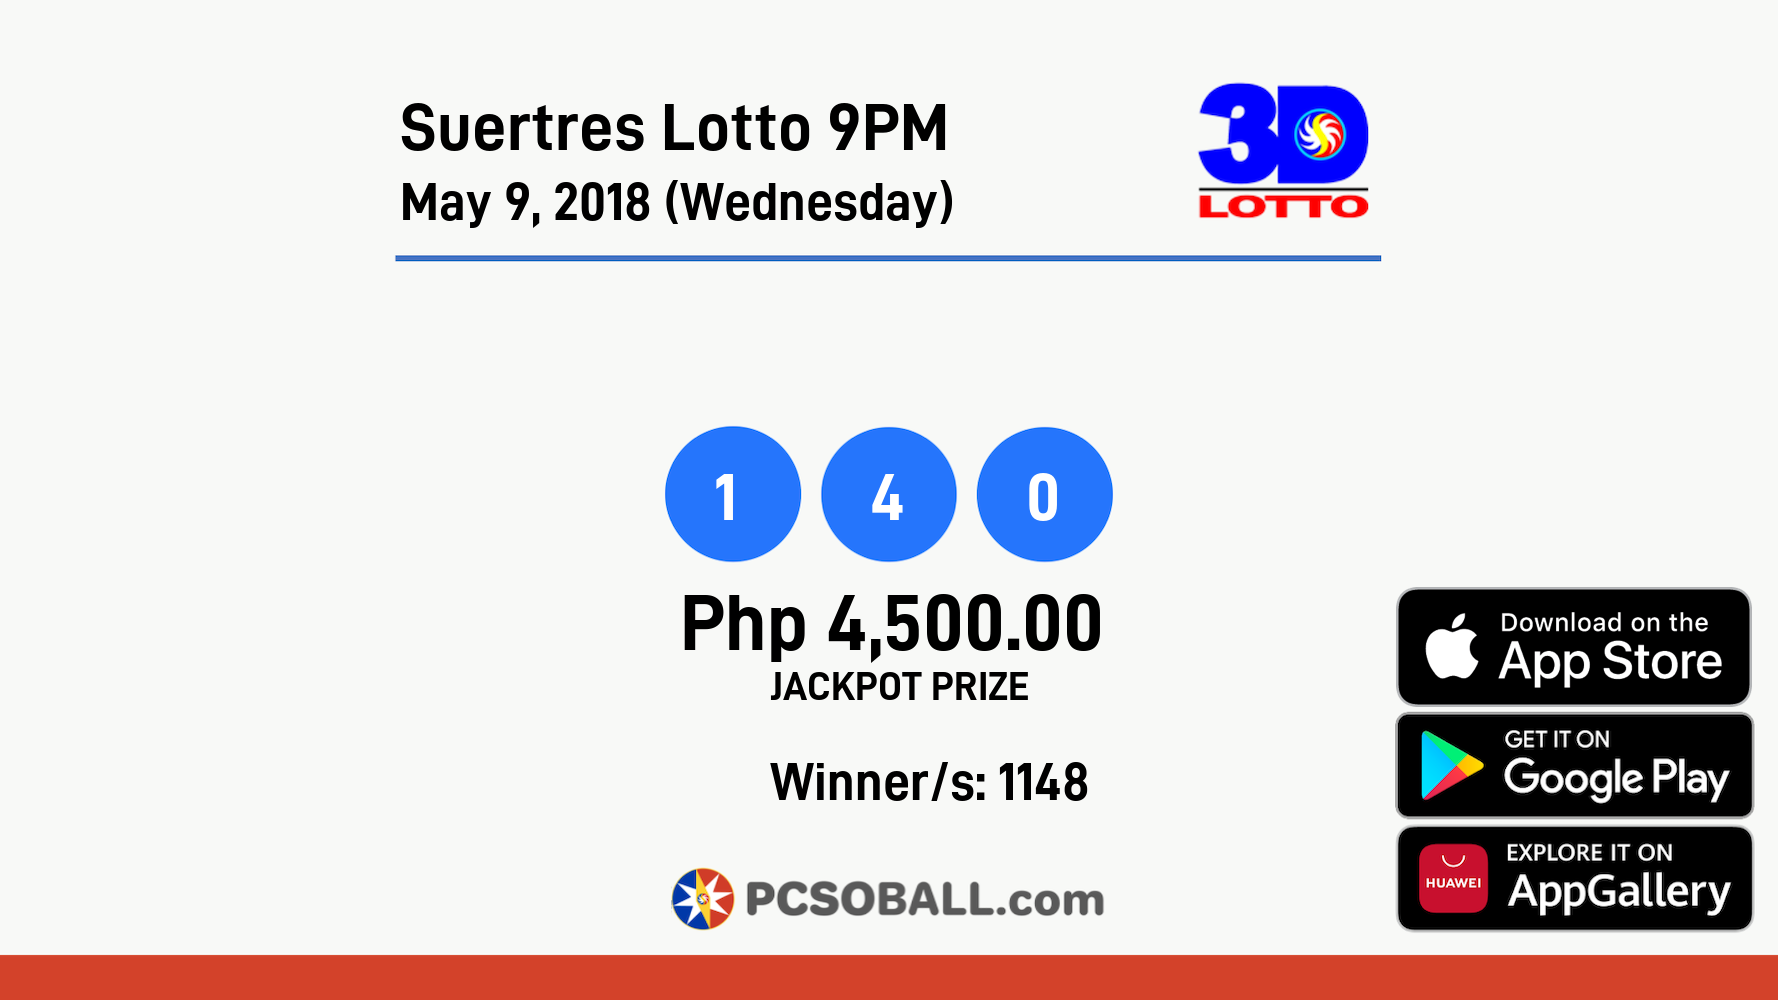 Suertres Lotto 9PM May 9, 2018 (Wednesday) Result